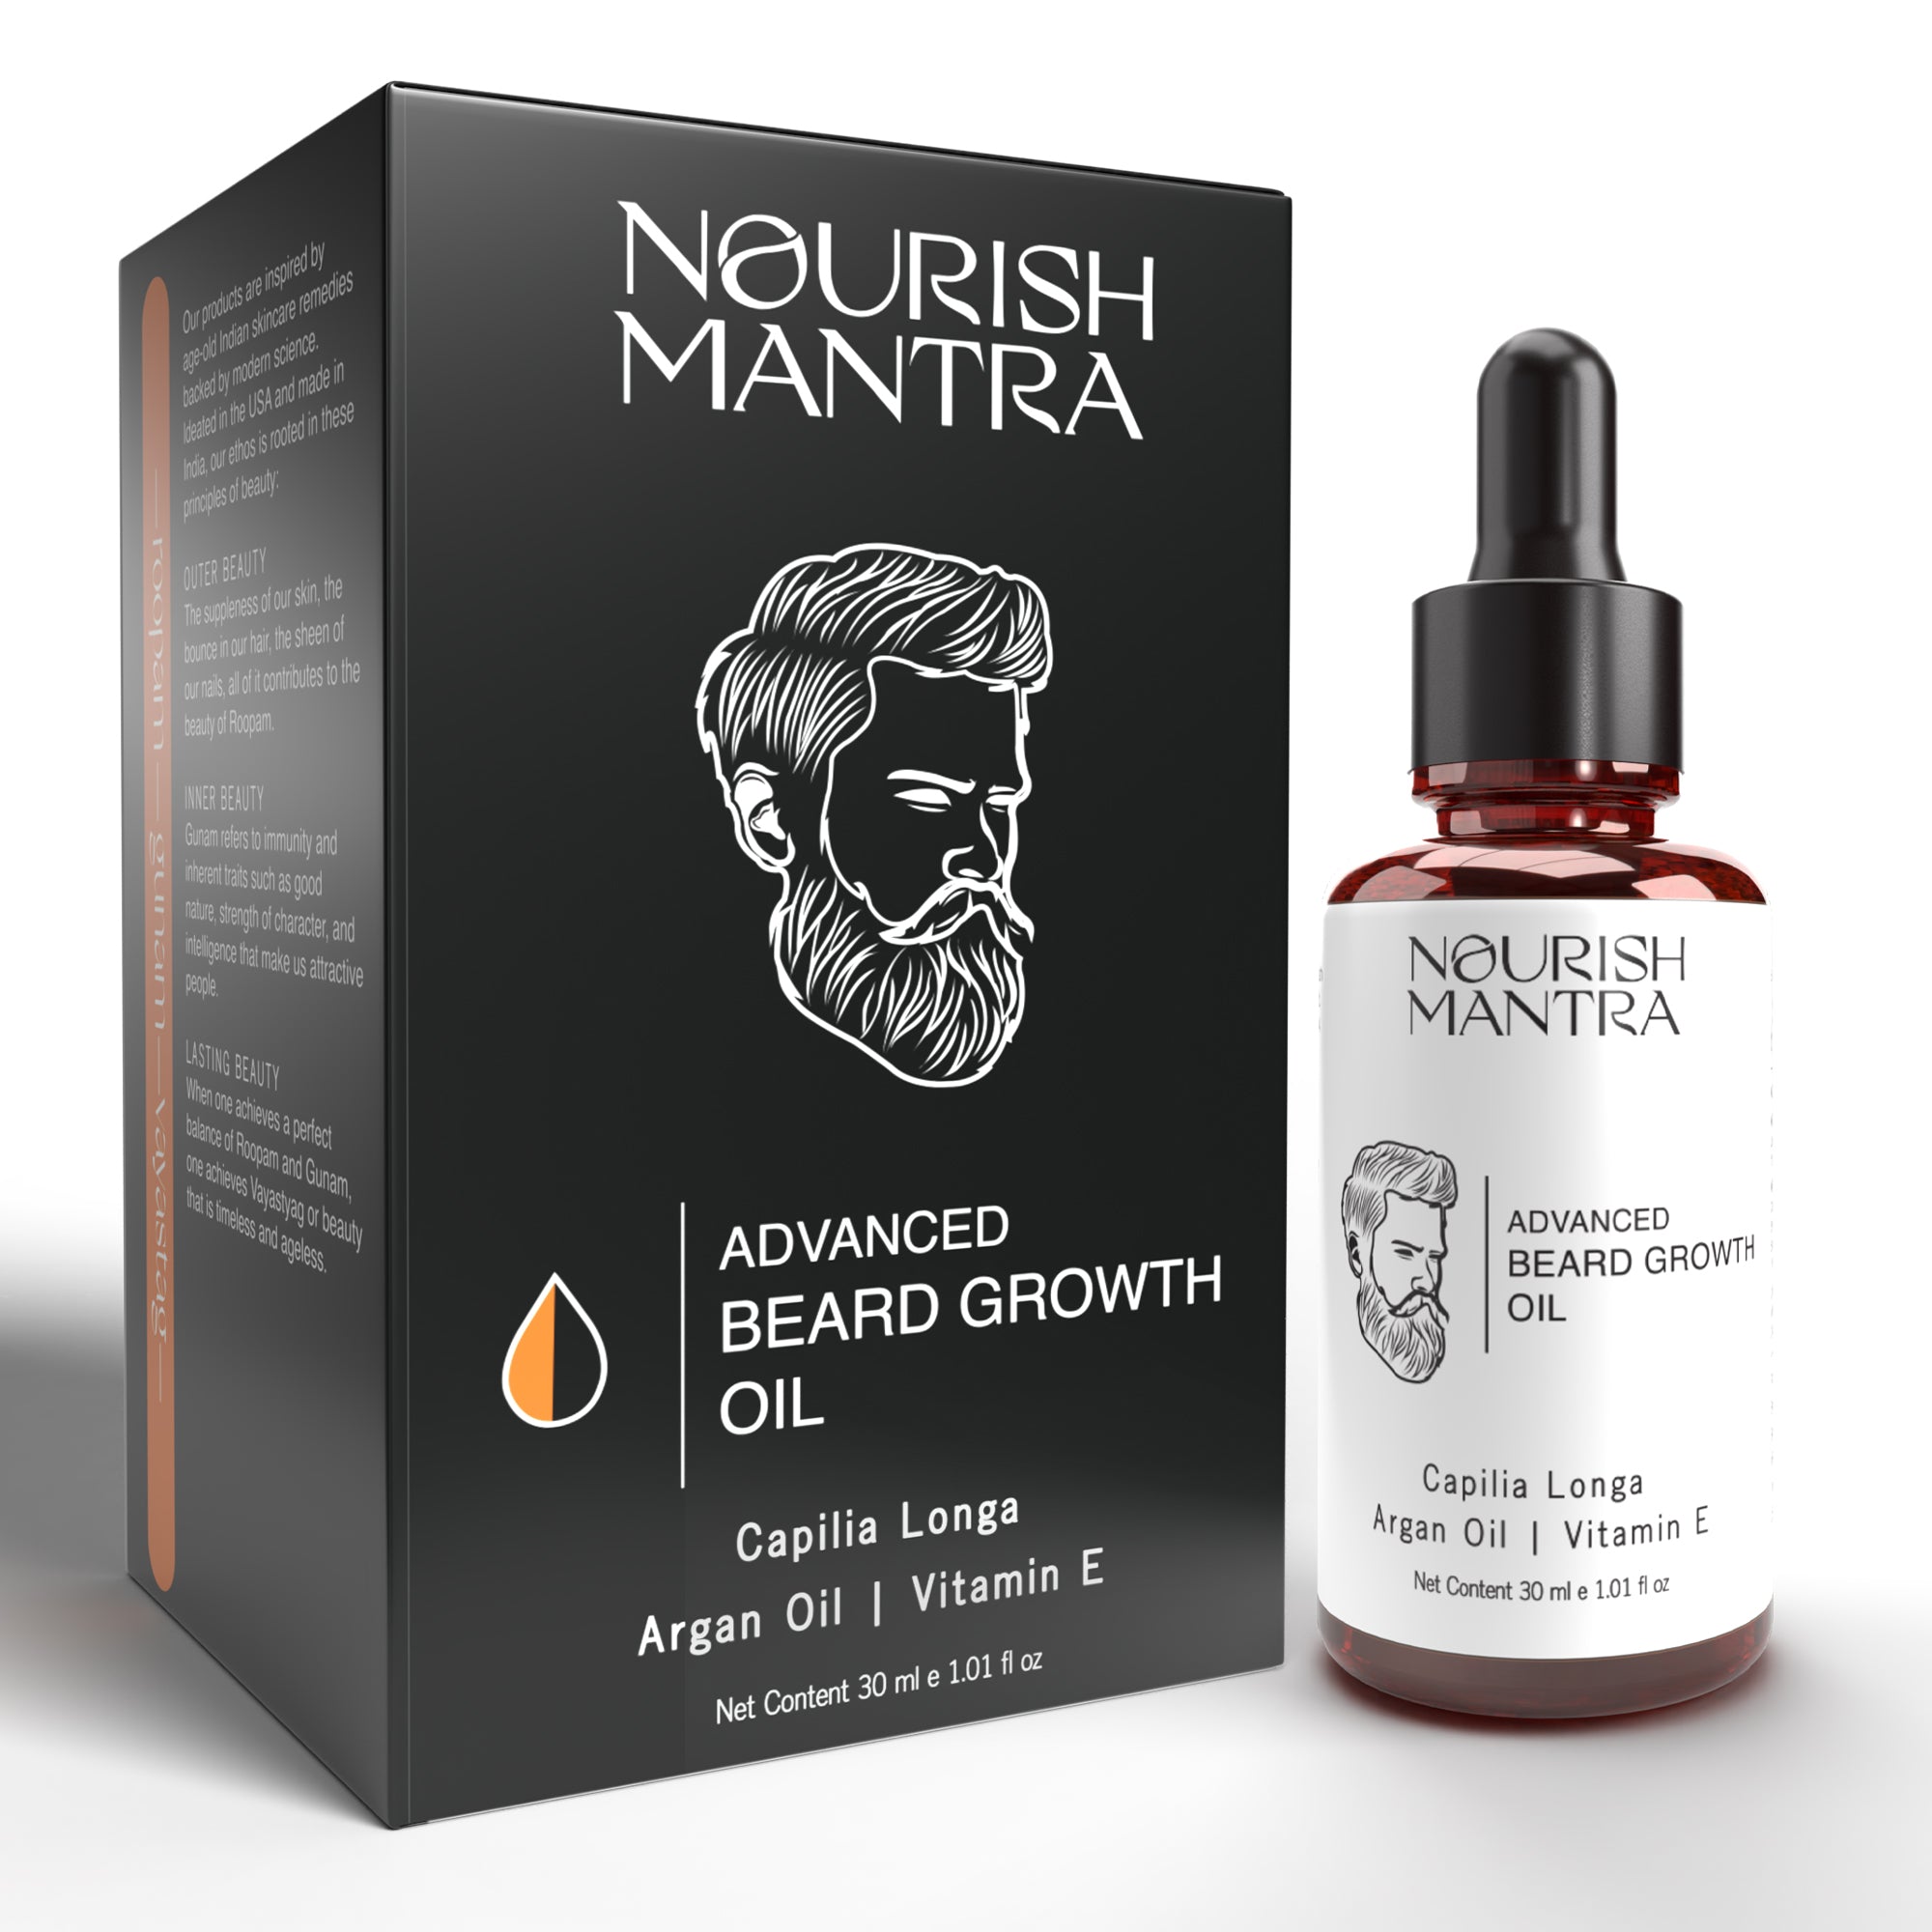 From Skincare to Beard Care: Nourish Mantra enters men’s grooming segment with the launch of  Advanced Beard Growth Oil